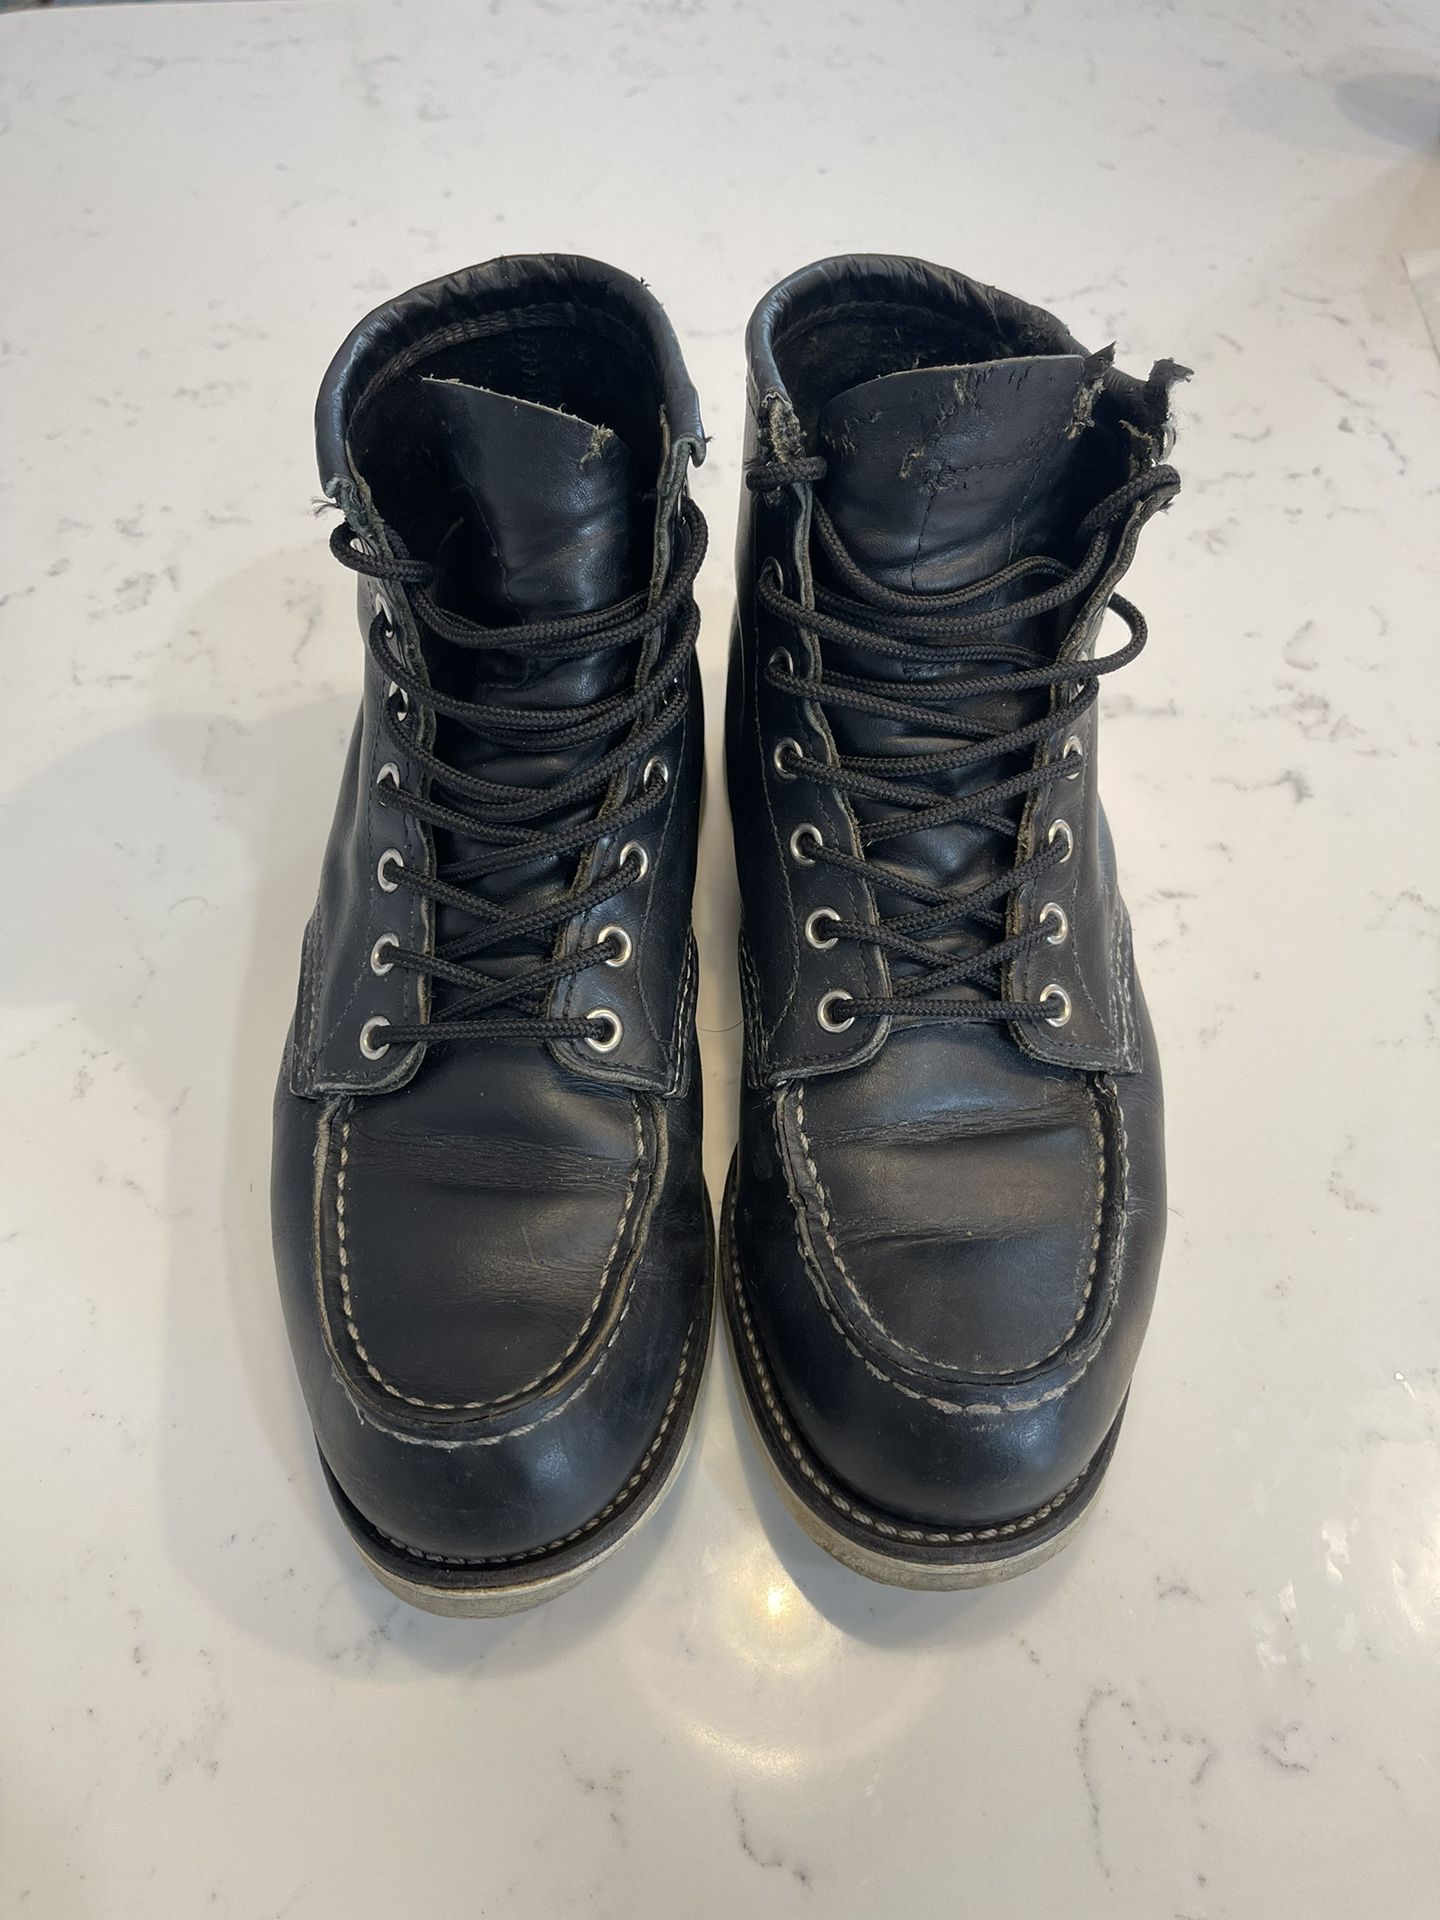 Red Wing Boots 9075 Size 8.5